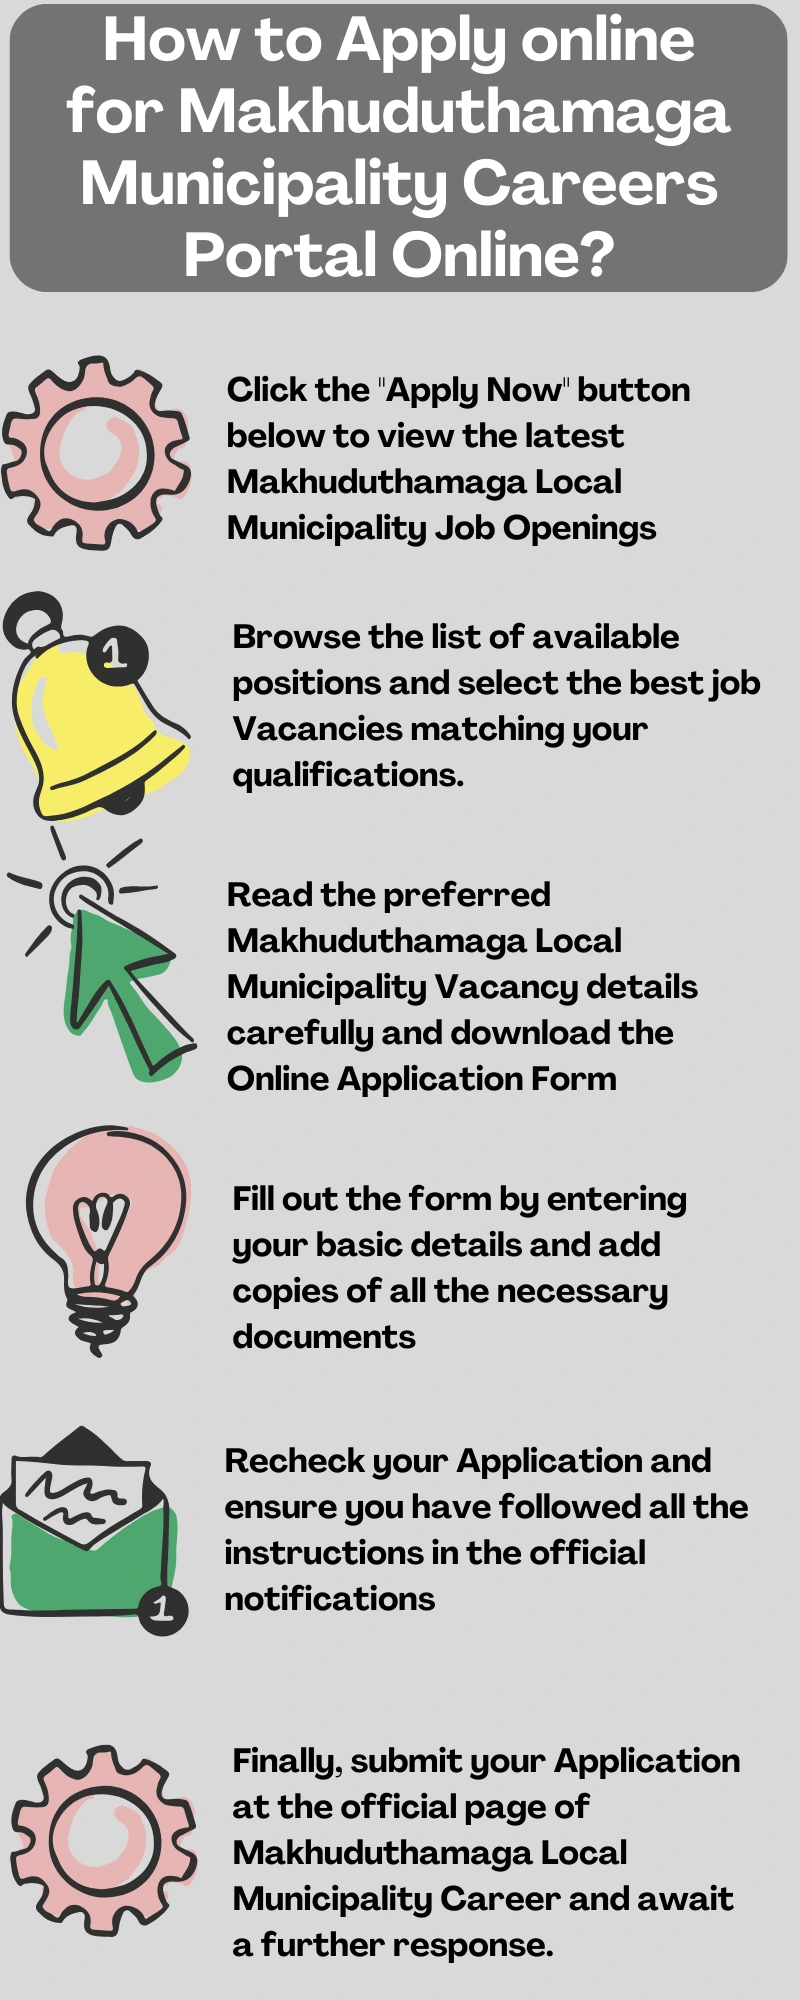 How to Apply online for Makhuduthamaga Municipality Careers Portal Online?